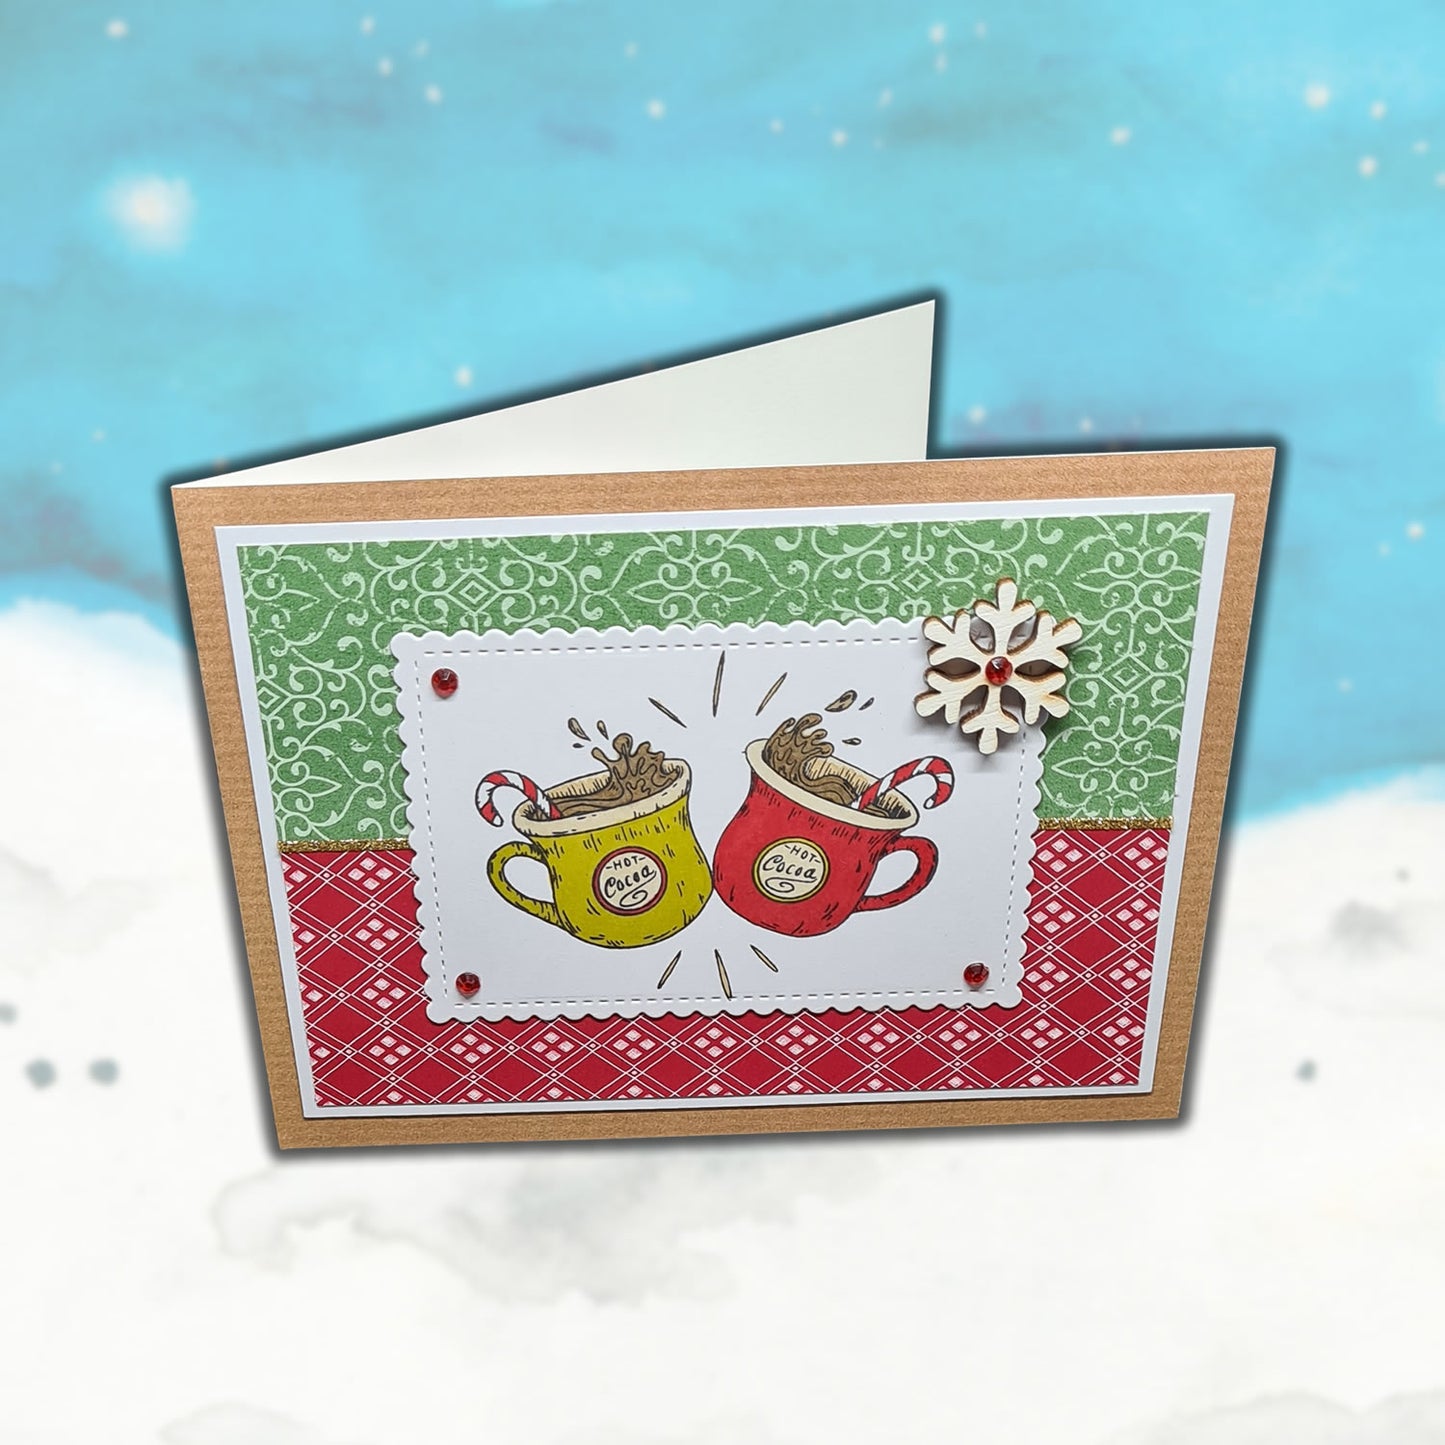 A Touch of Christmas Stamp Collection by Sophie Spencer Beeley